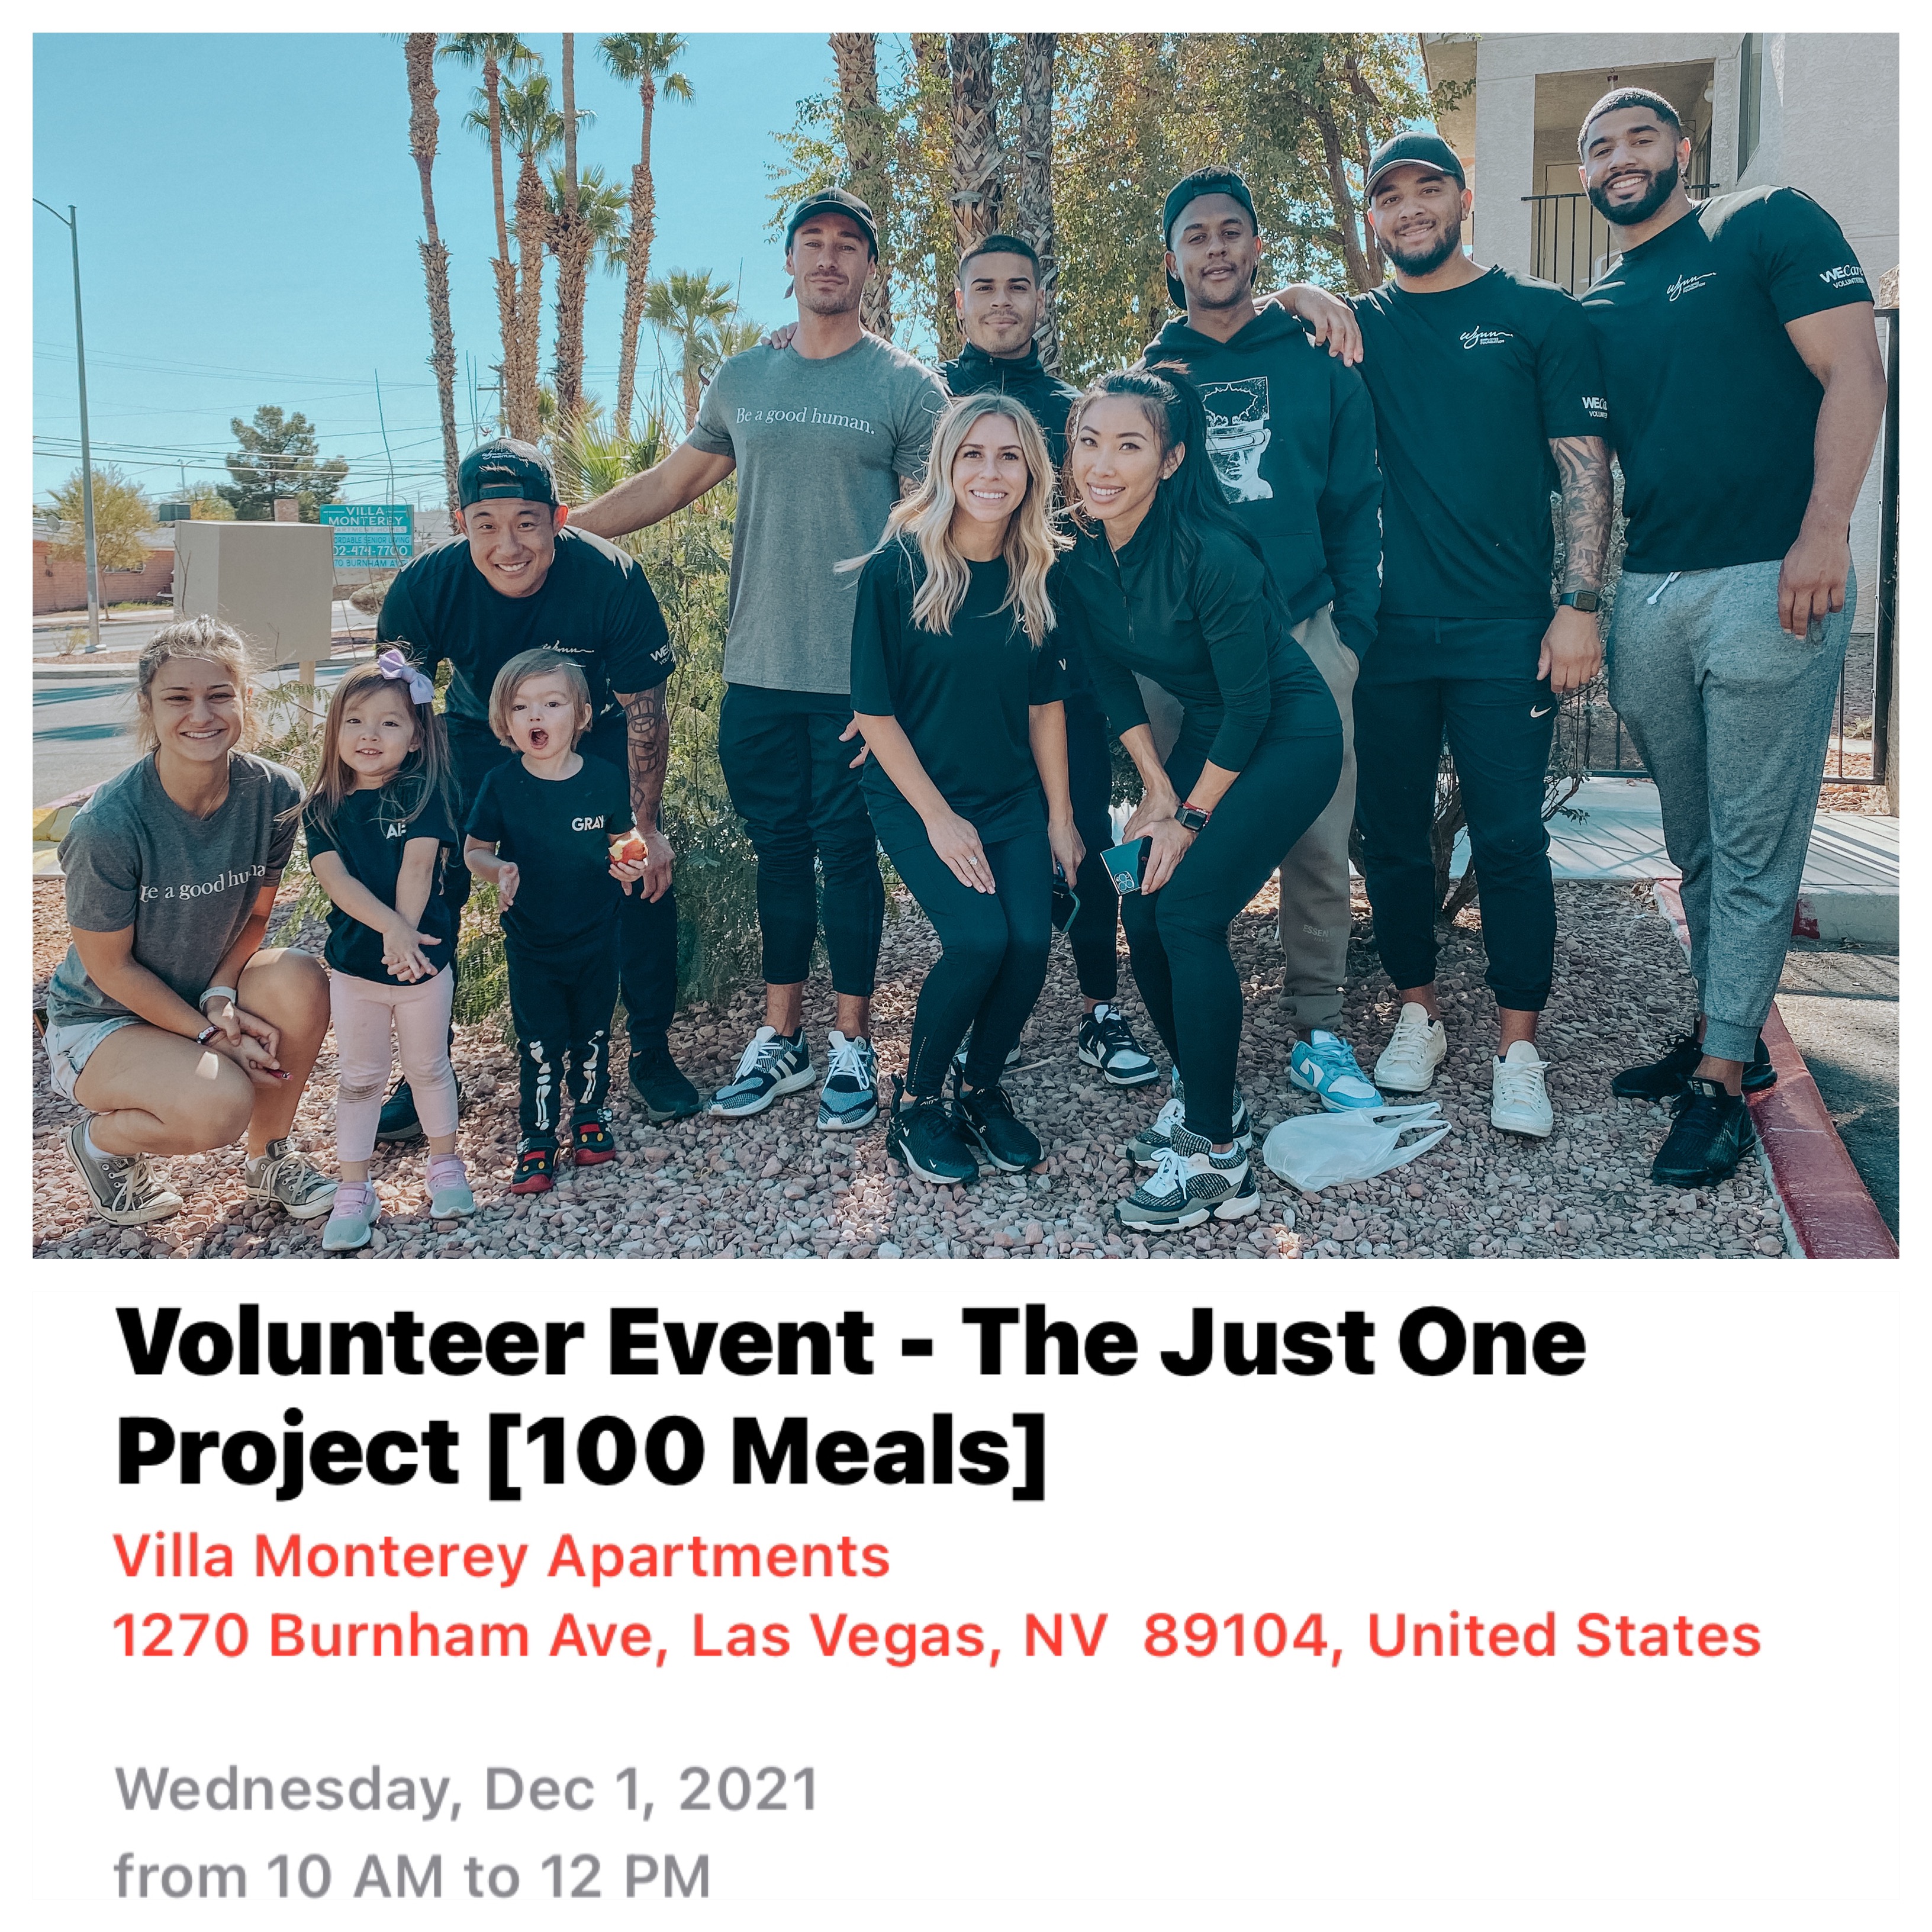 The Just One Project - 100 Meals-December 1